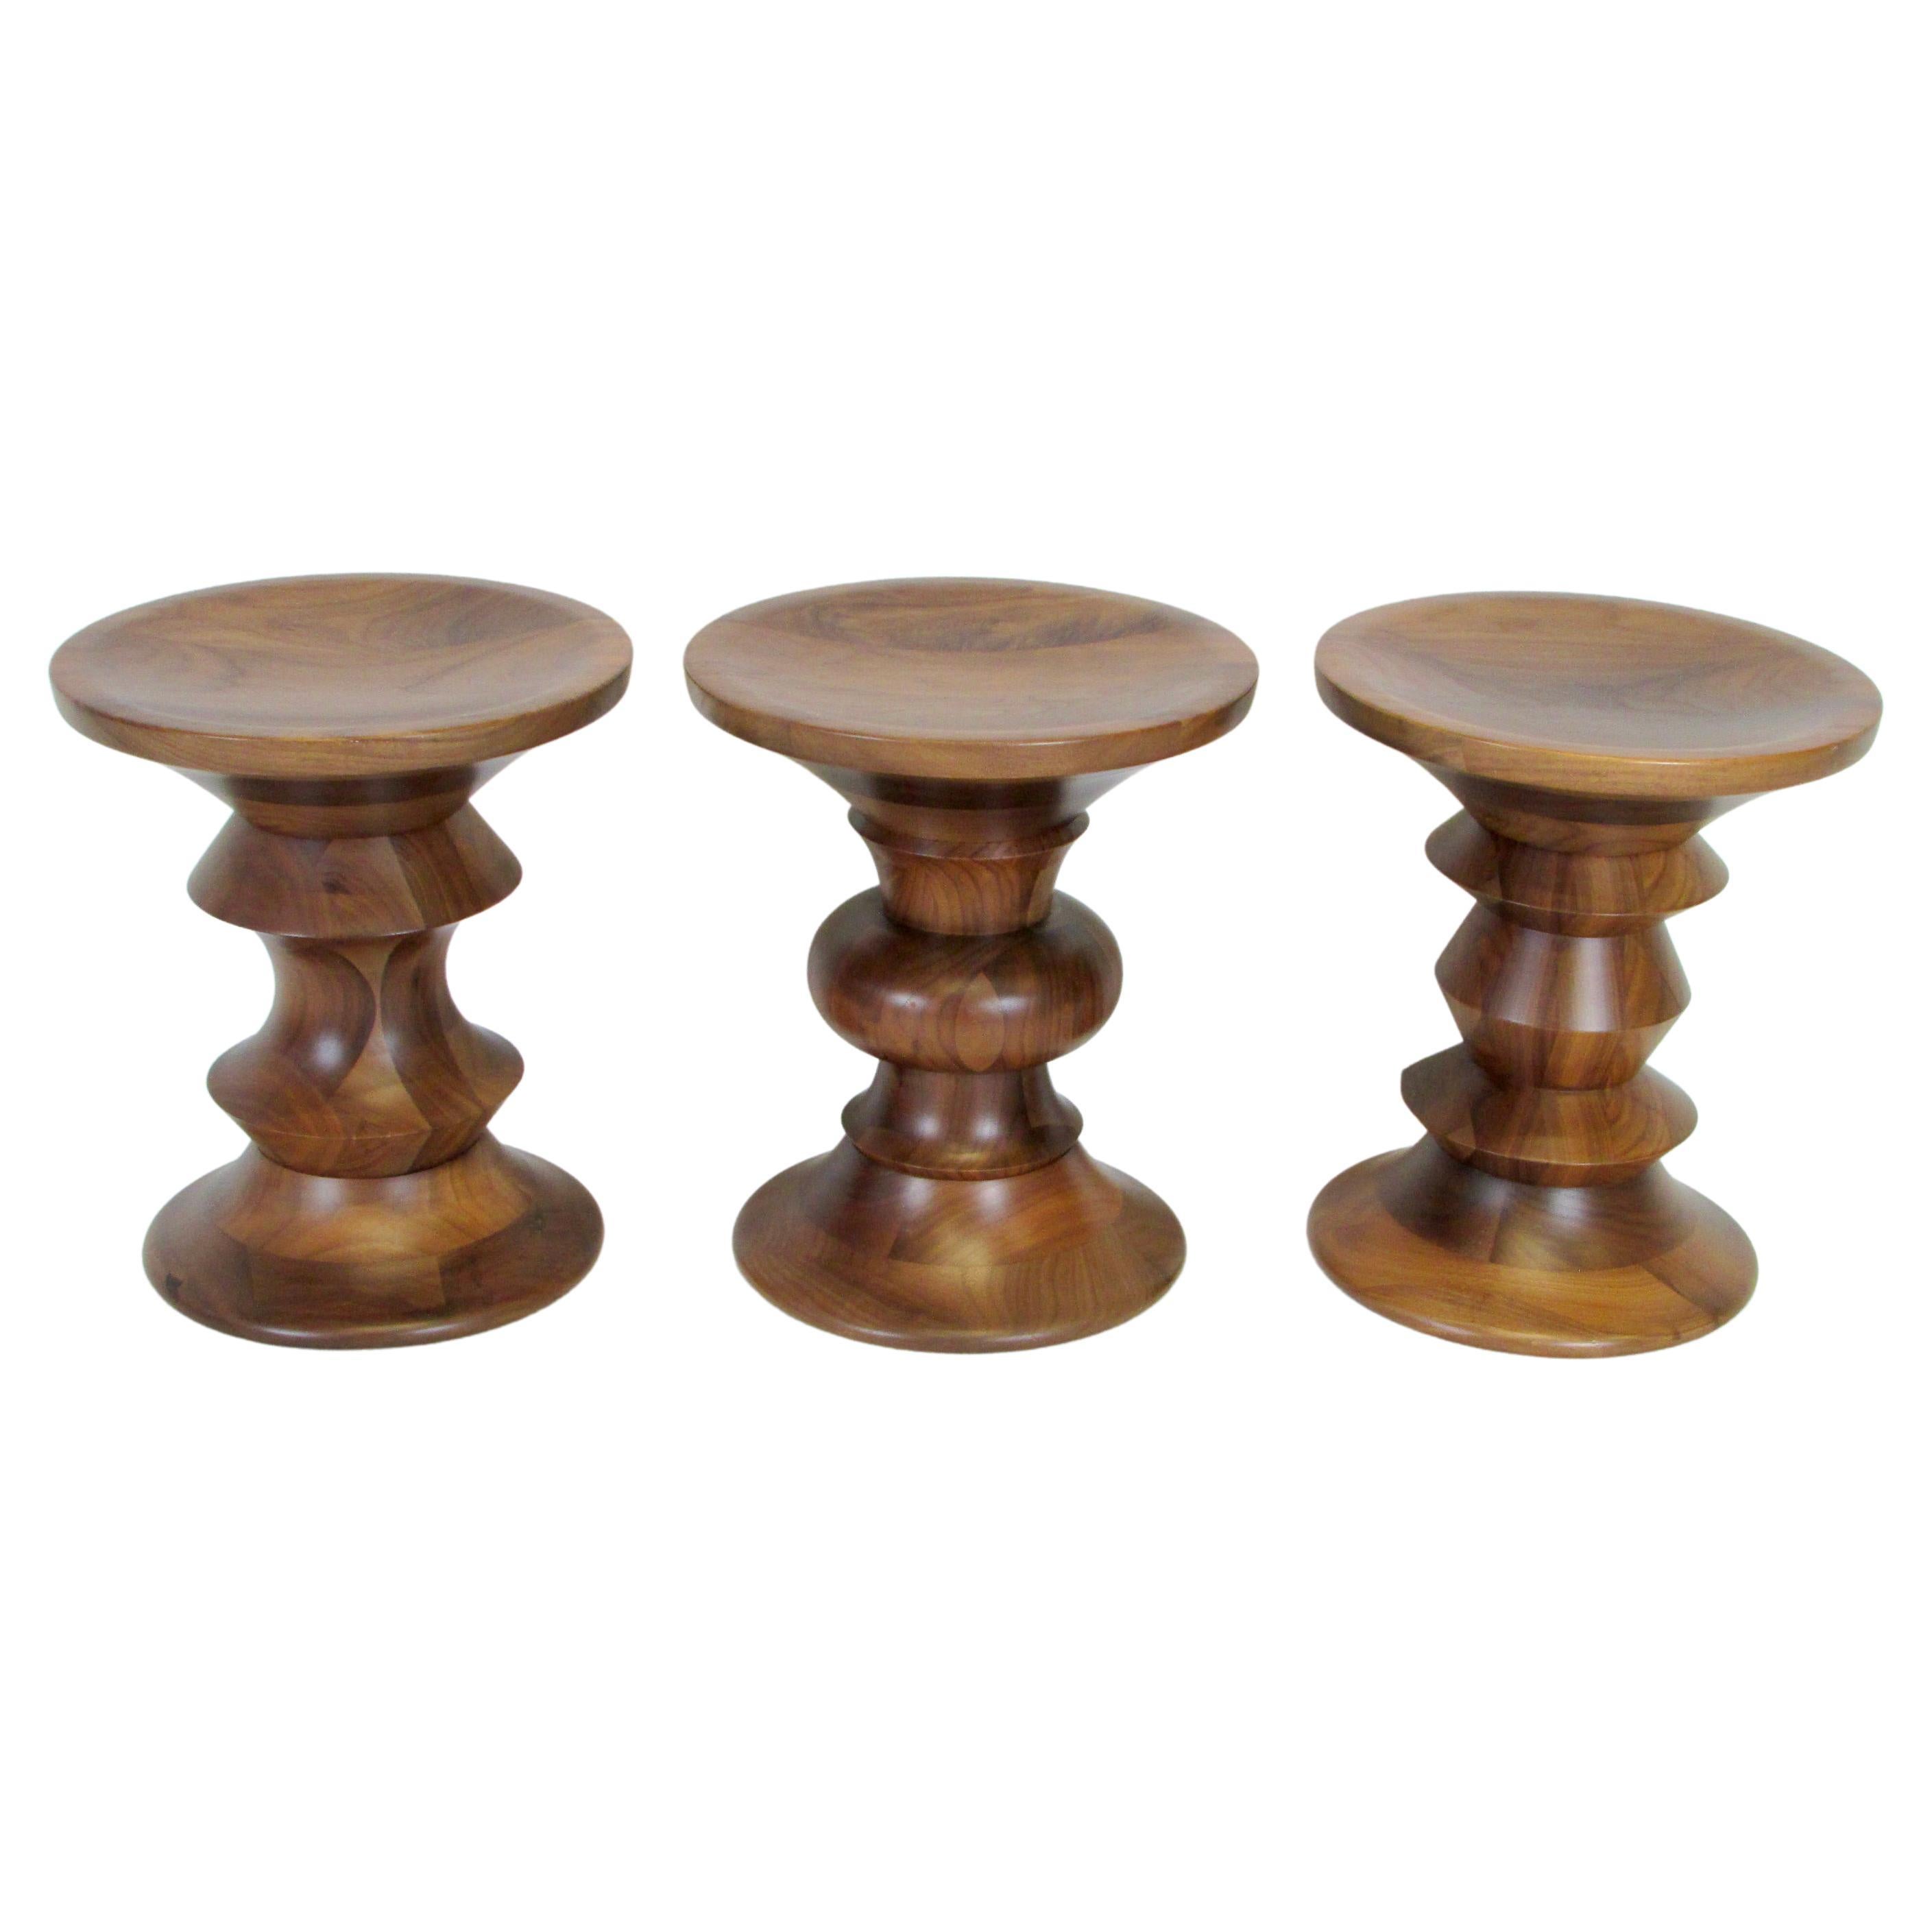 Set of Three Eames for Herman Miller Time Life Building Turned Wood Stools